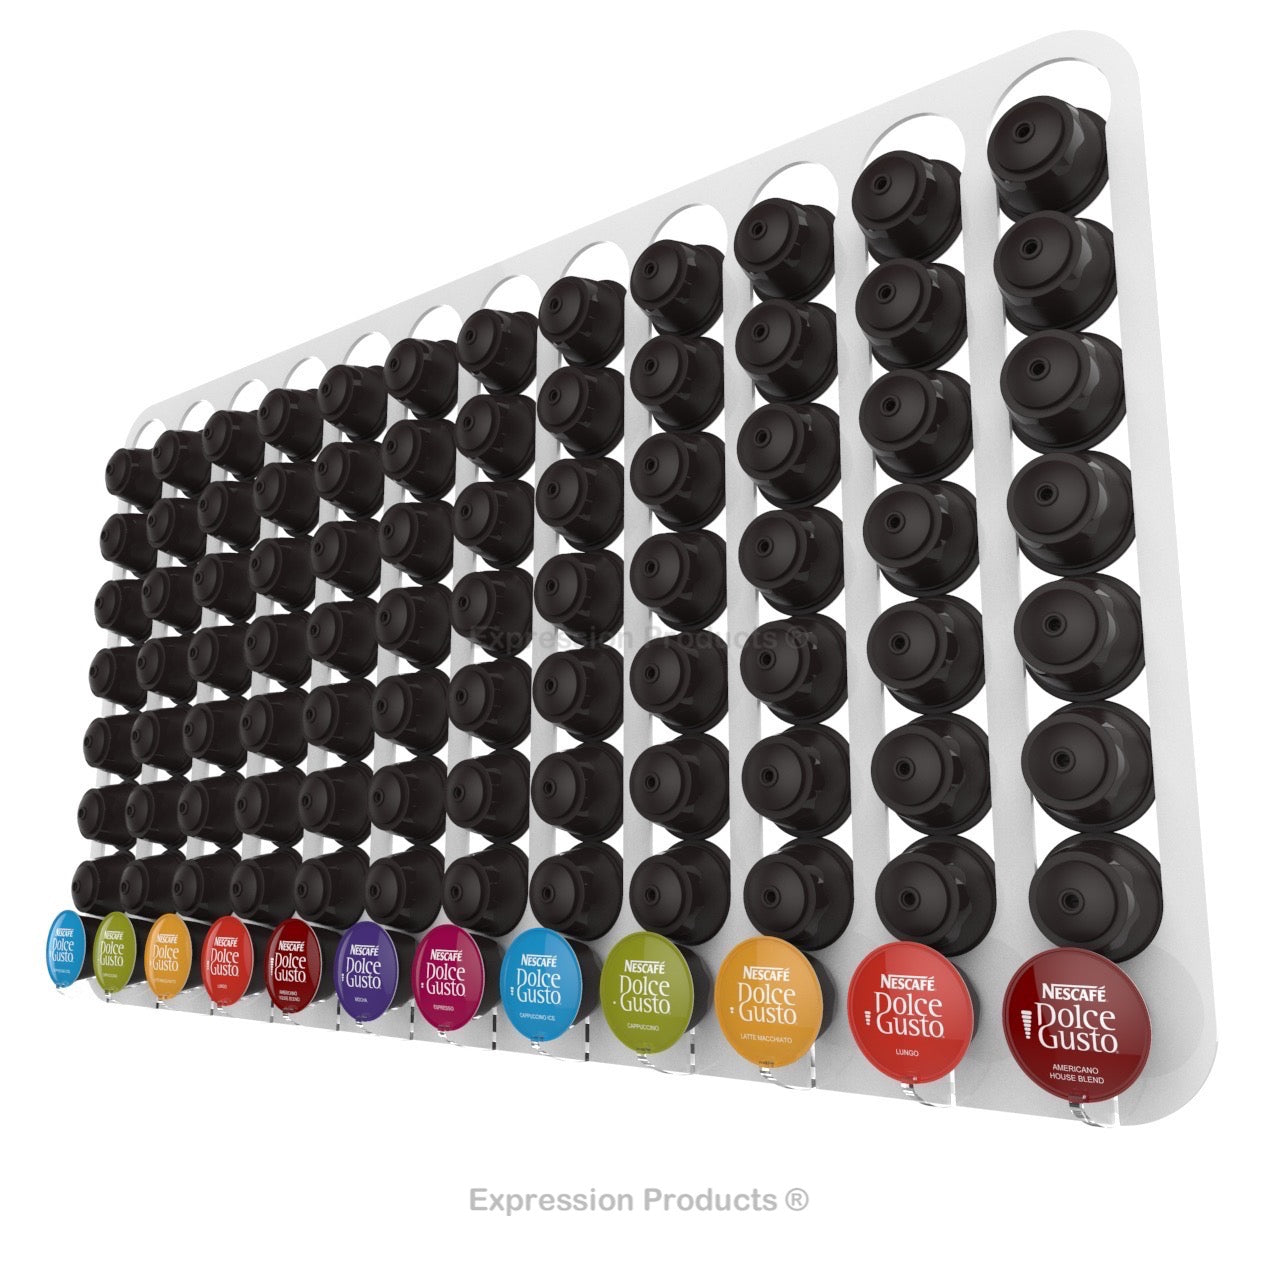 Dolce Gusto Coffee Pod Holder, Wall Mounted.  Shown in White Holding 96 Pods